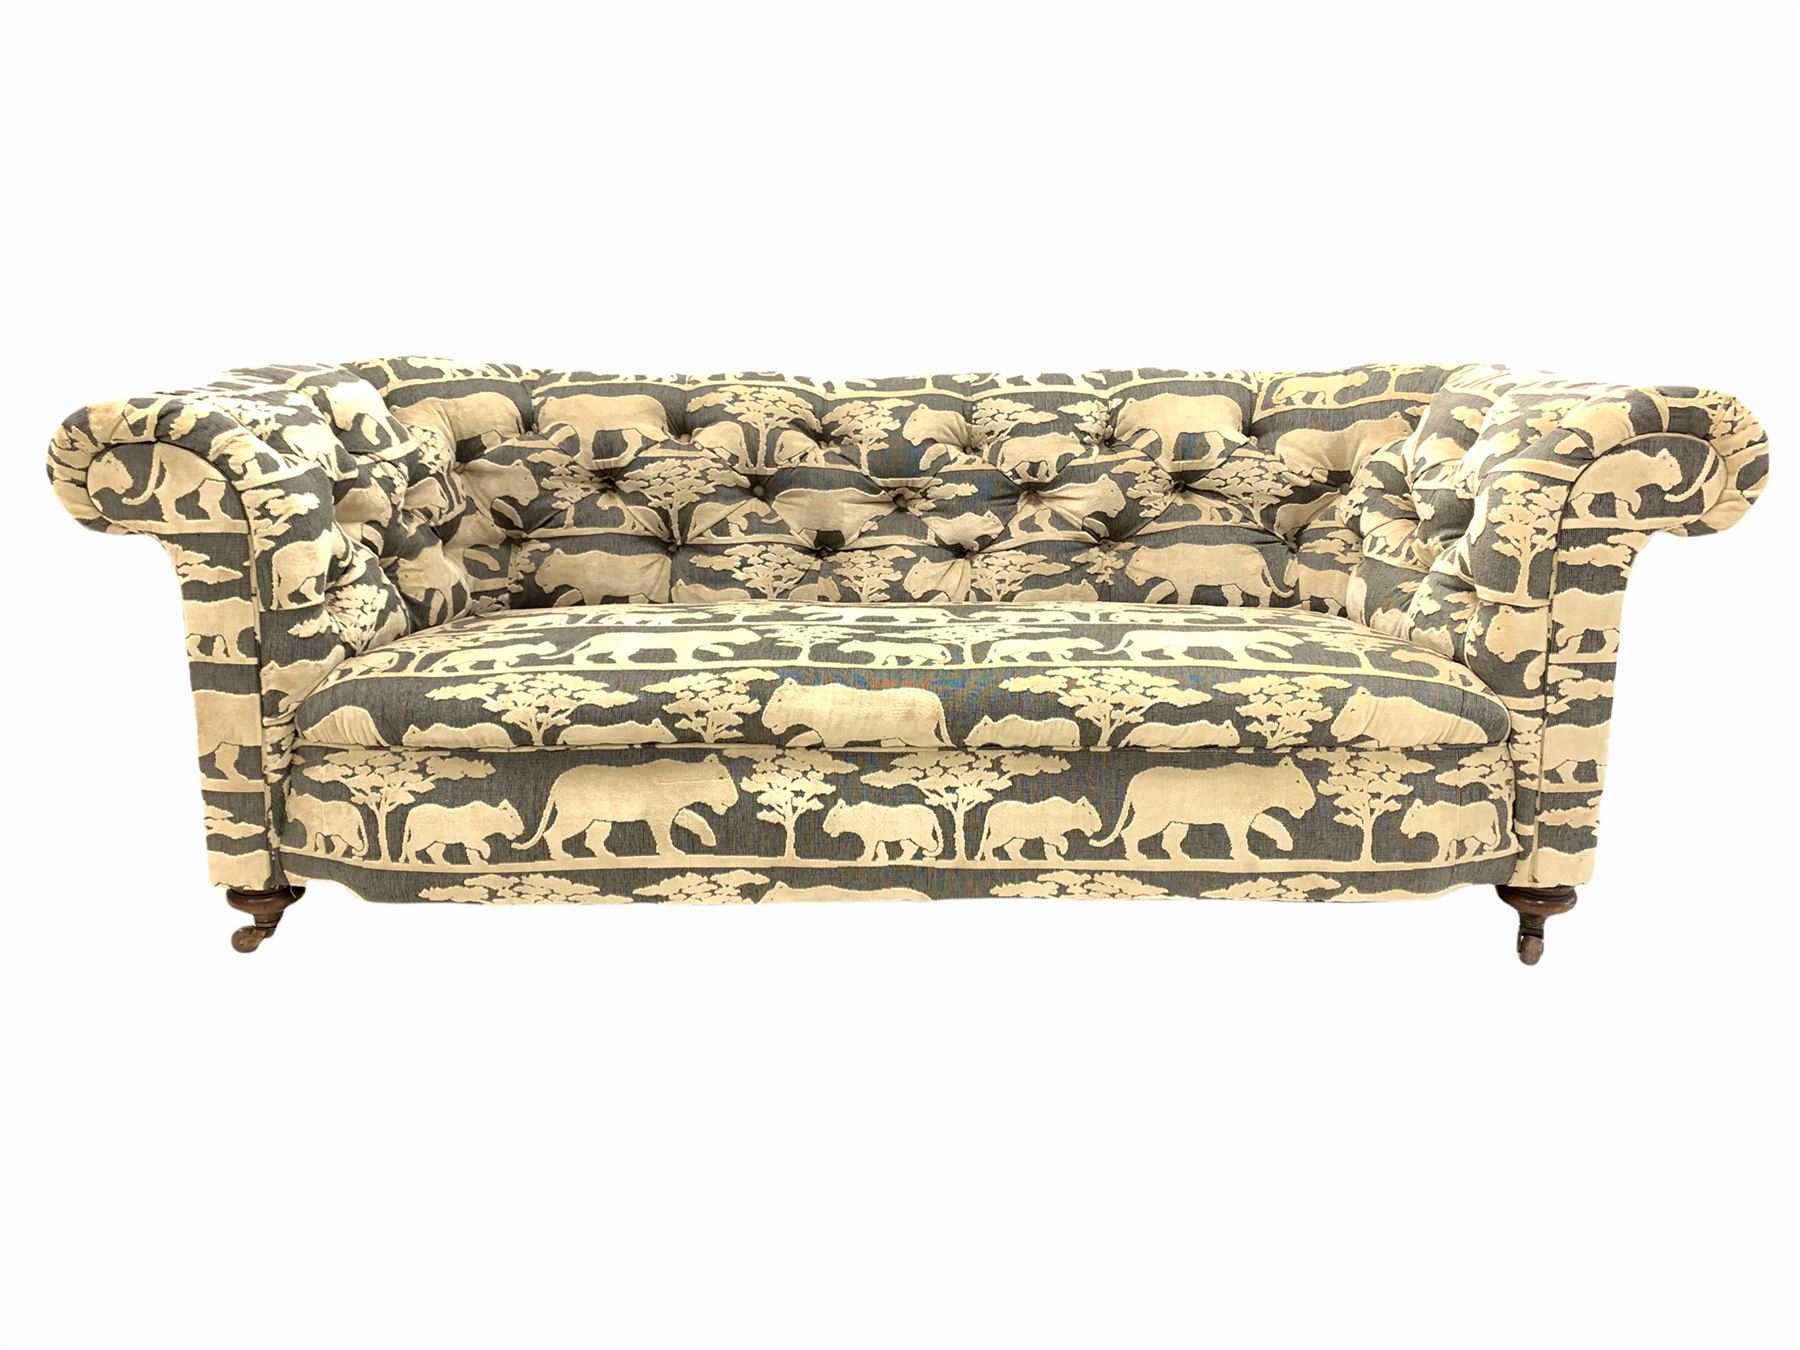 Victorian chesterfield sofa - Image 2 of 3